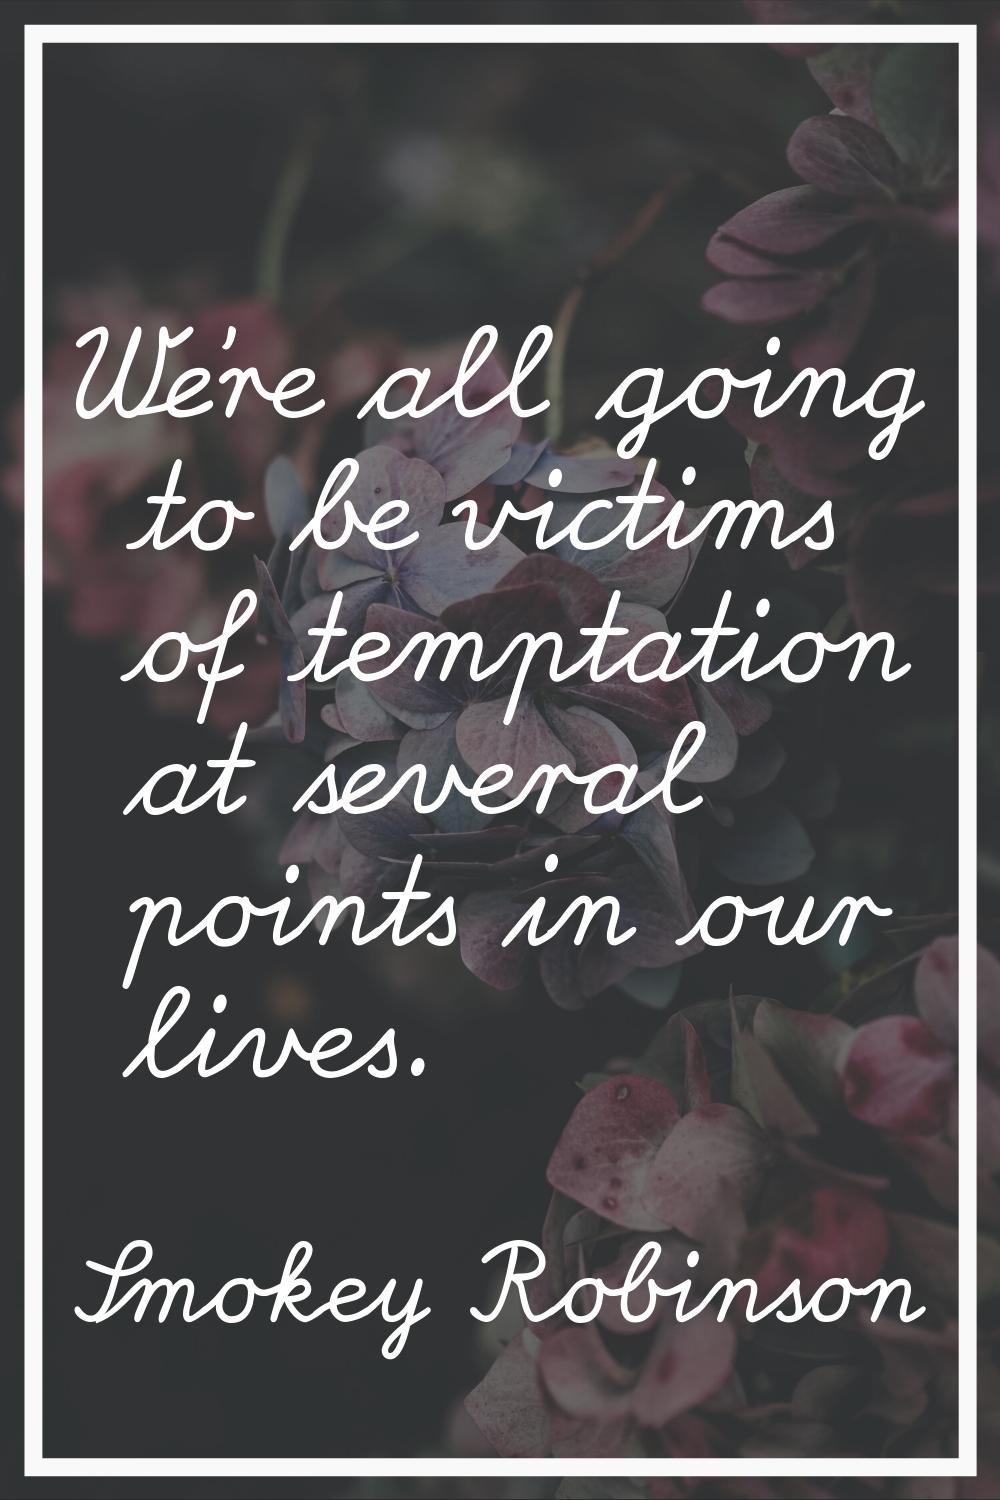 We're all going to be victims of temptation at several points in our lives.